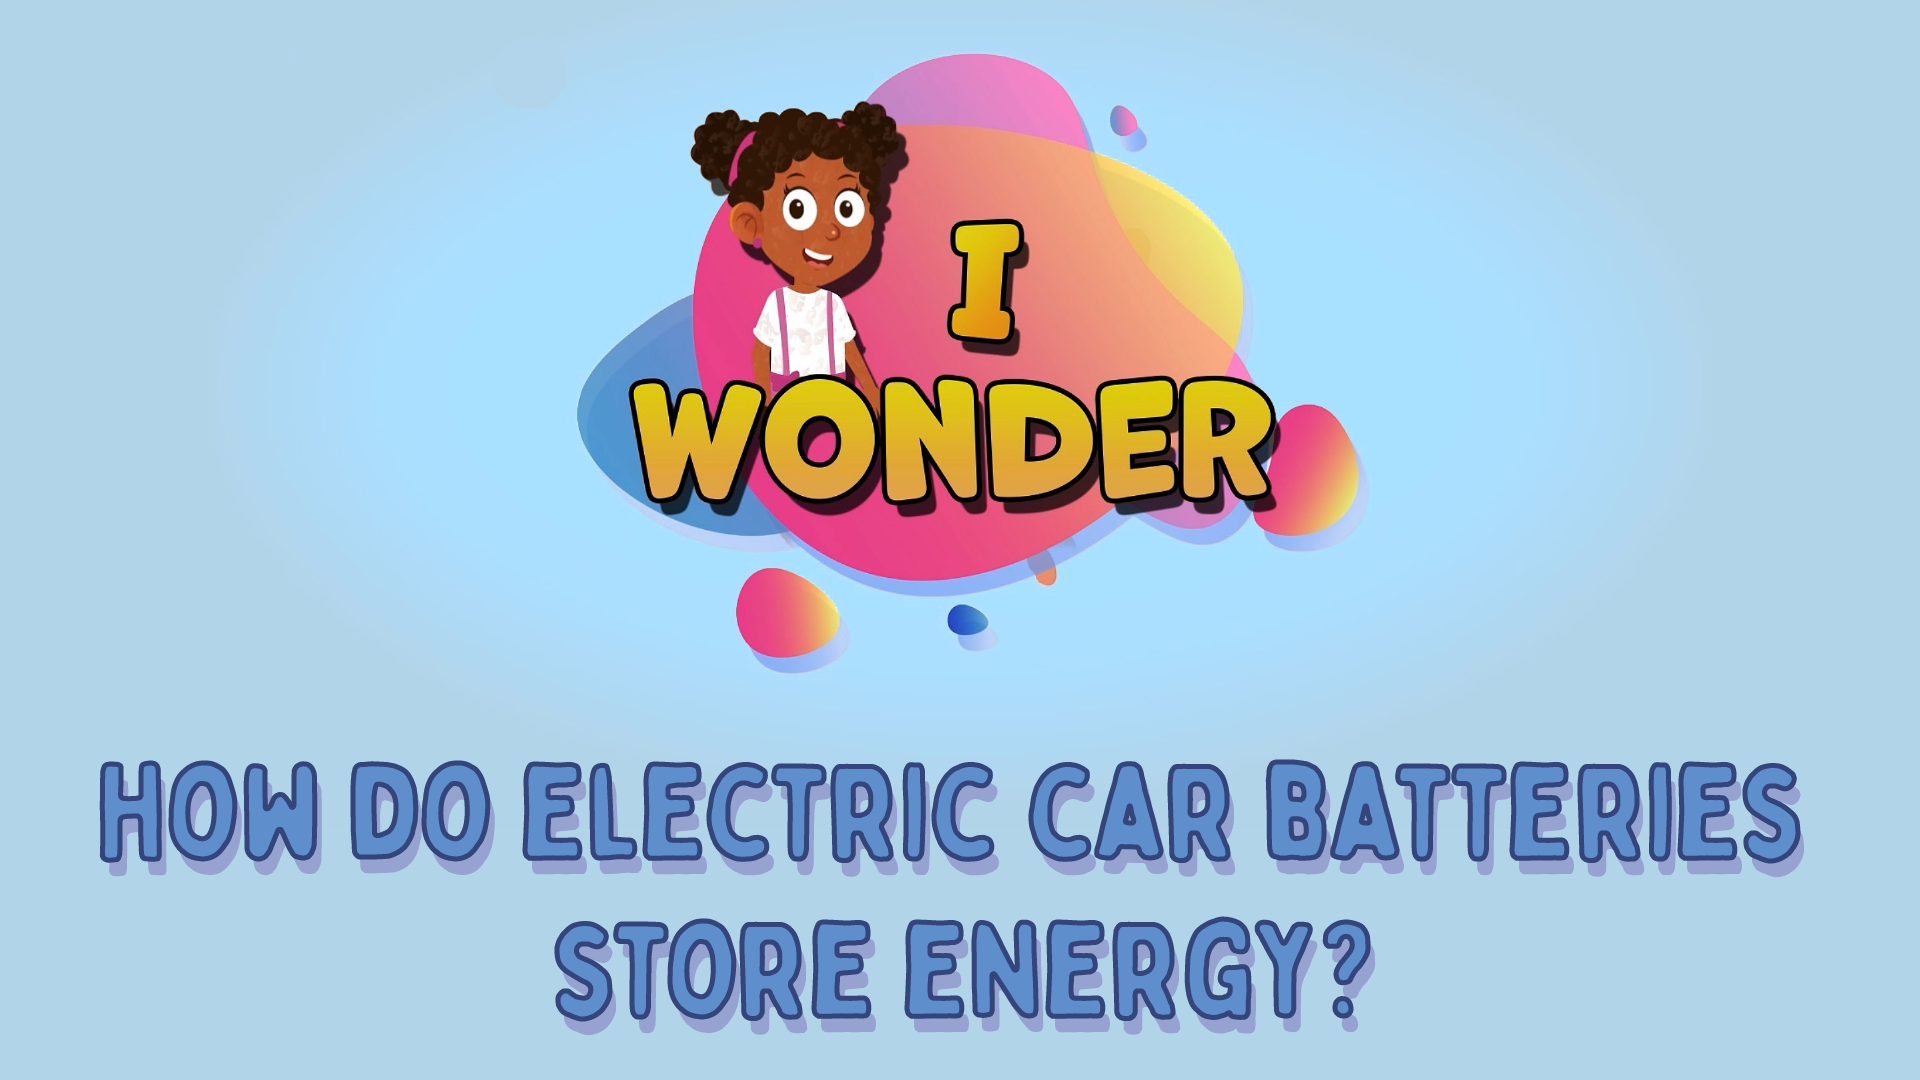 How Do Electric Car Batteries Store Energy?